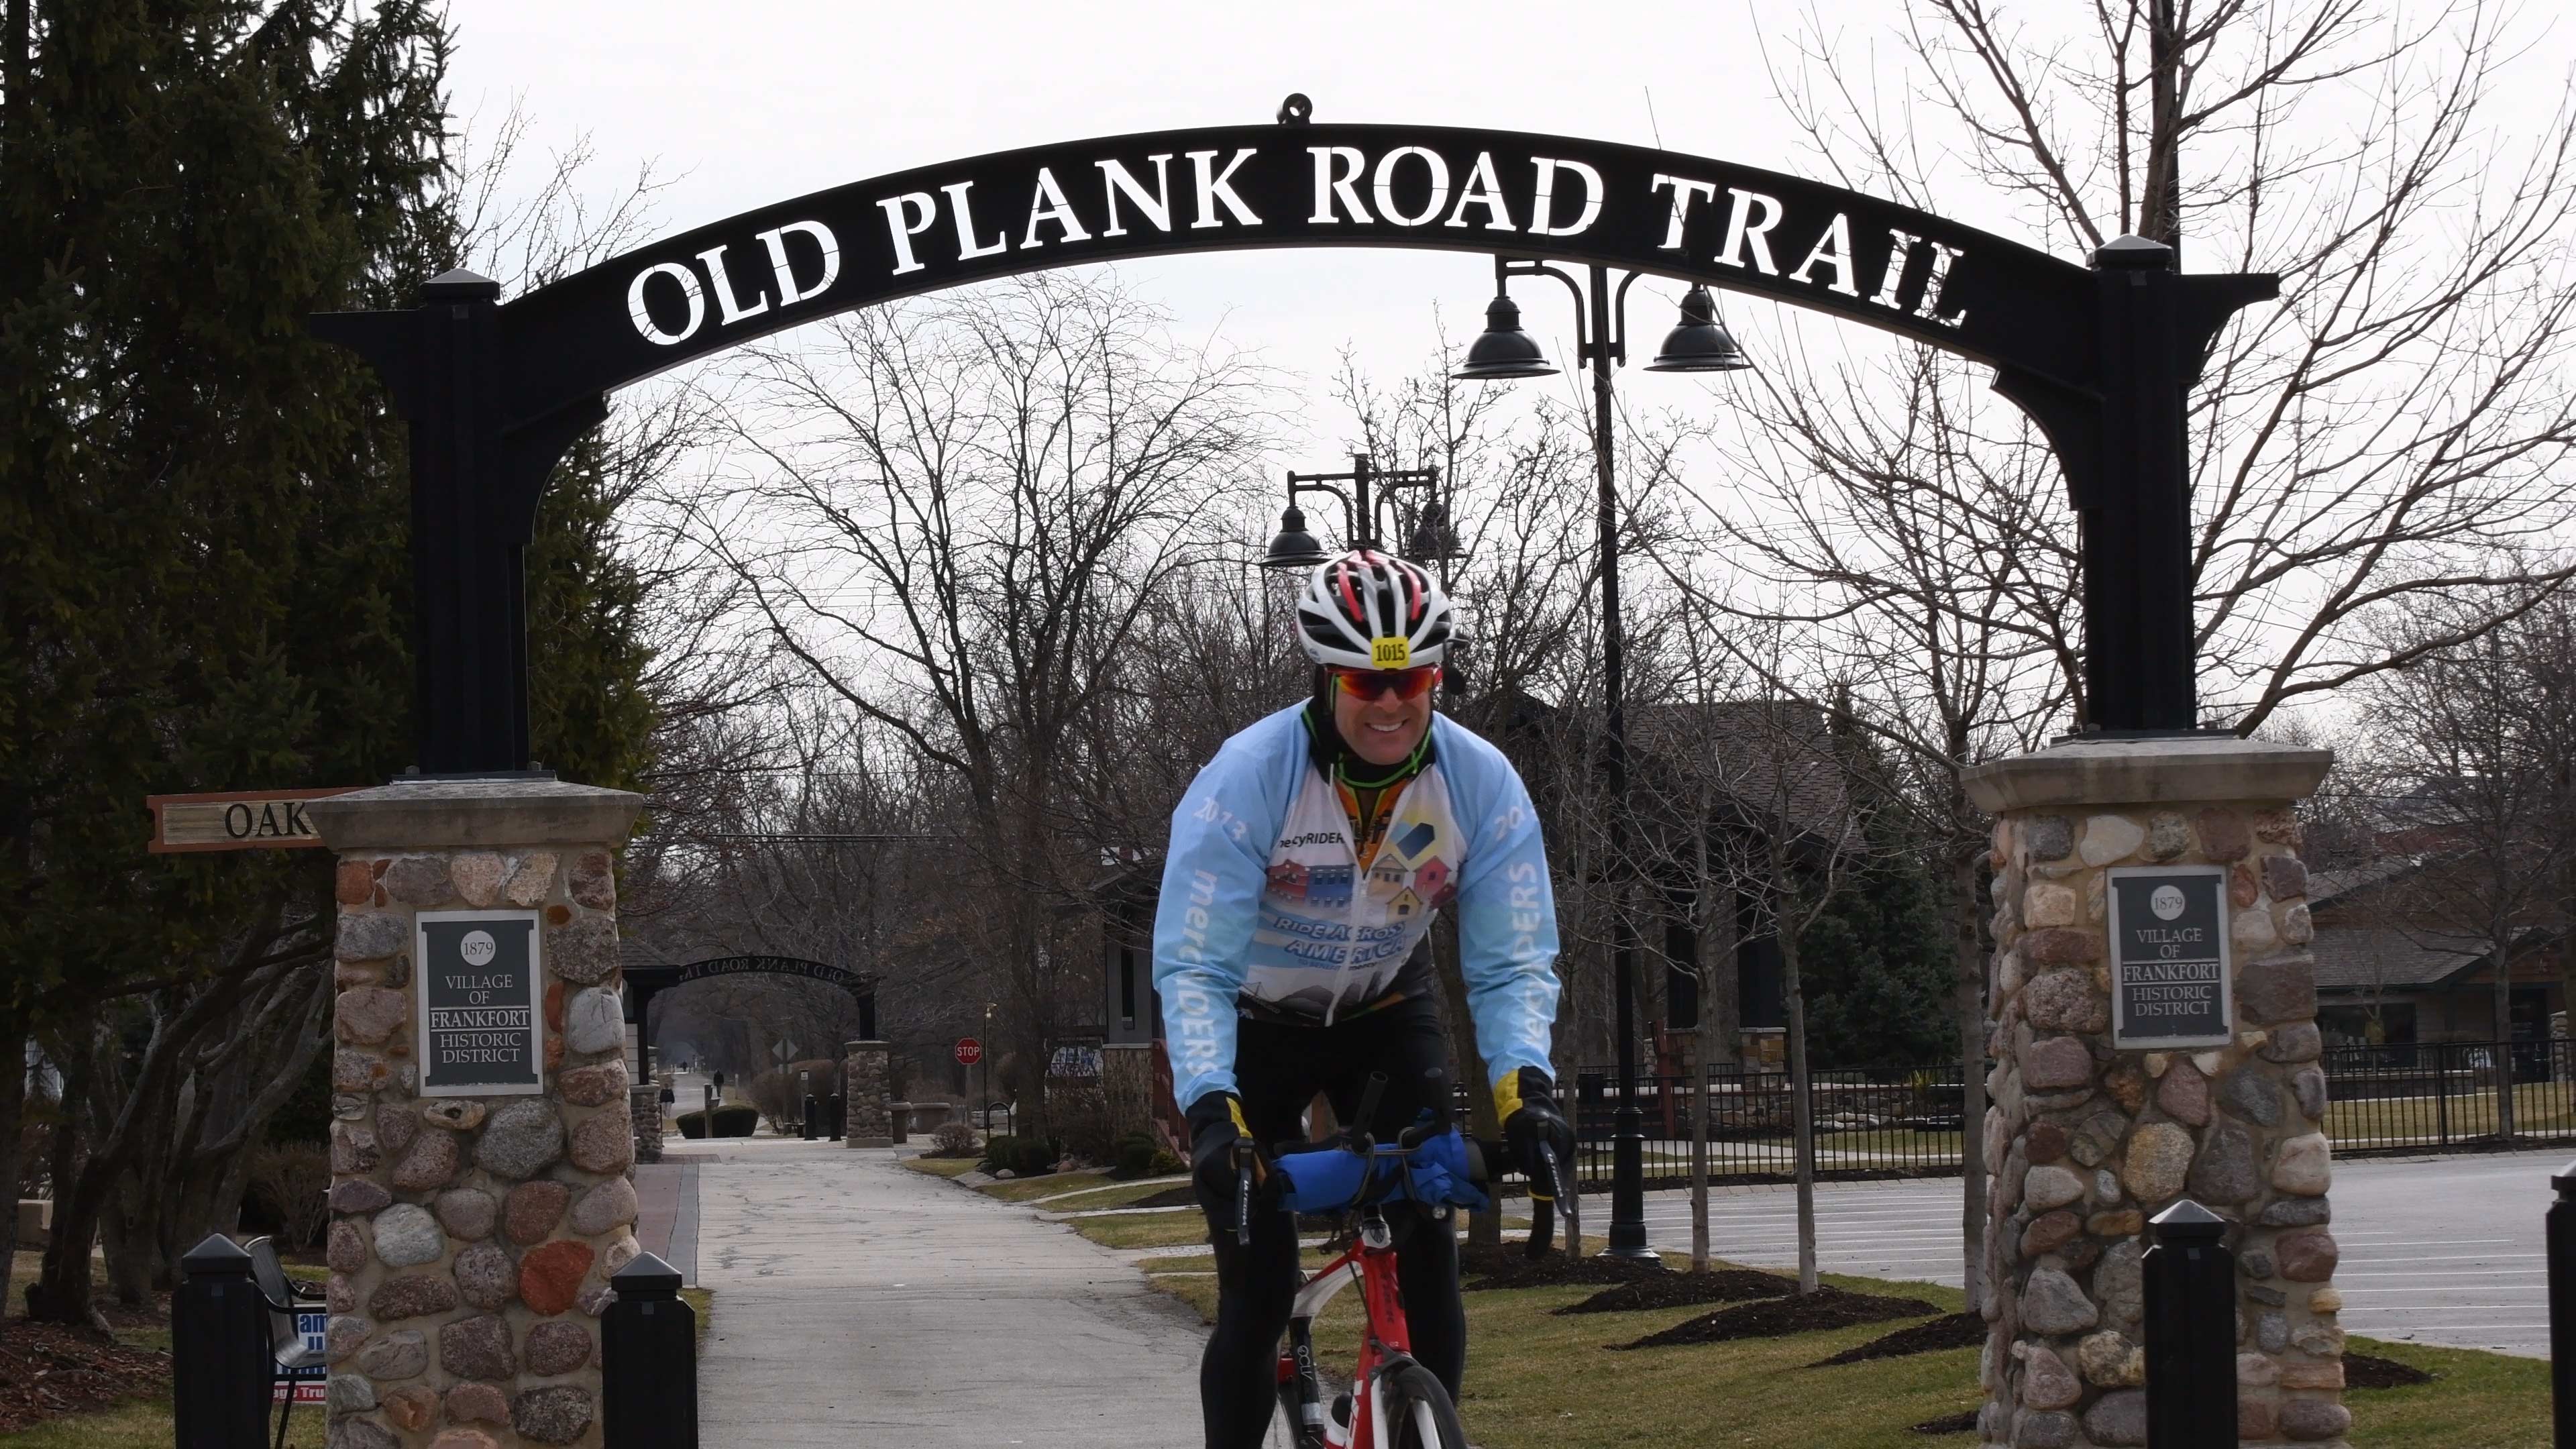 A bicyclist along the Old Plank Road Trail.